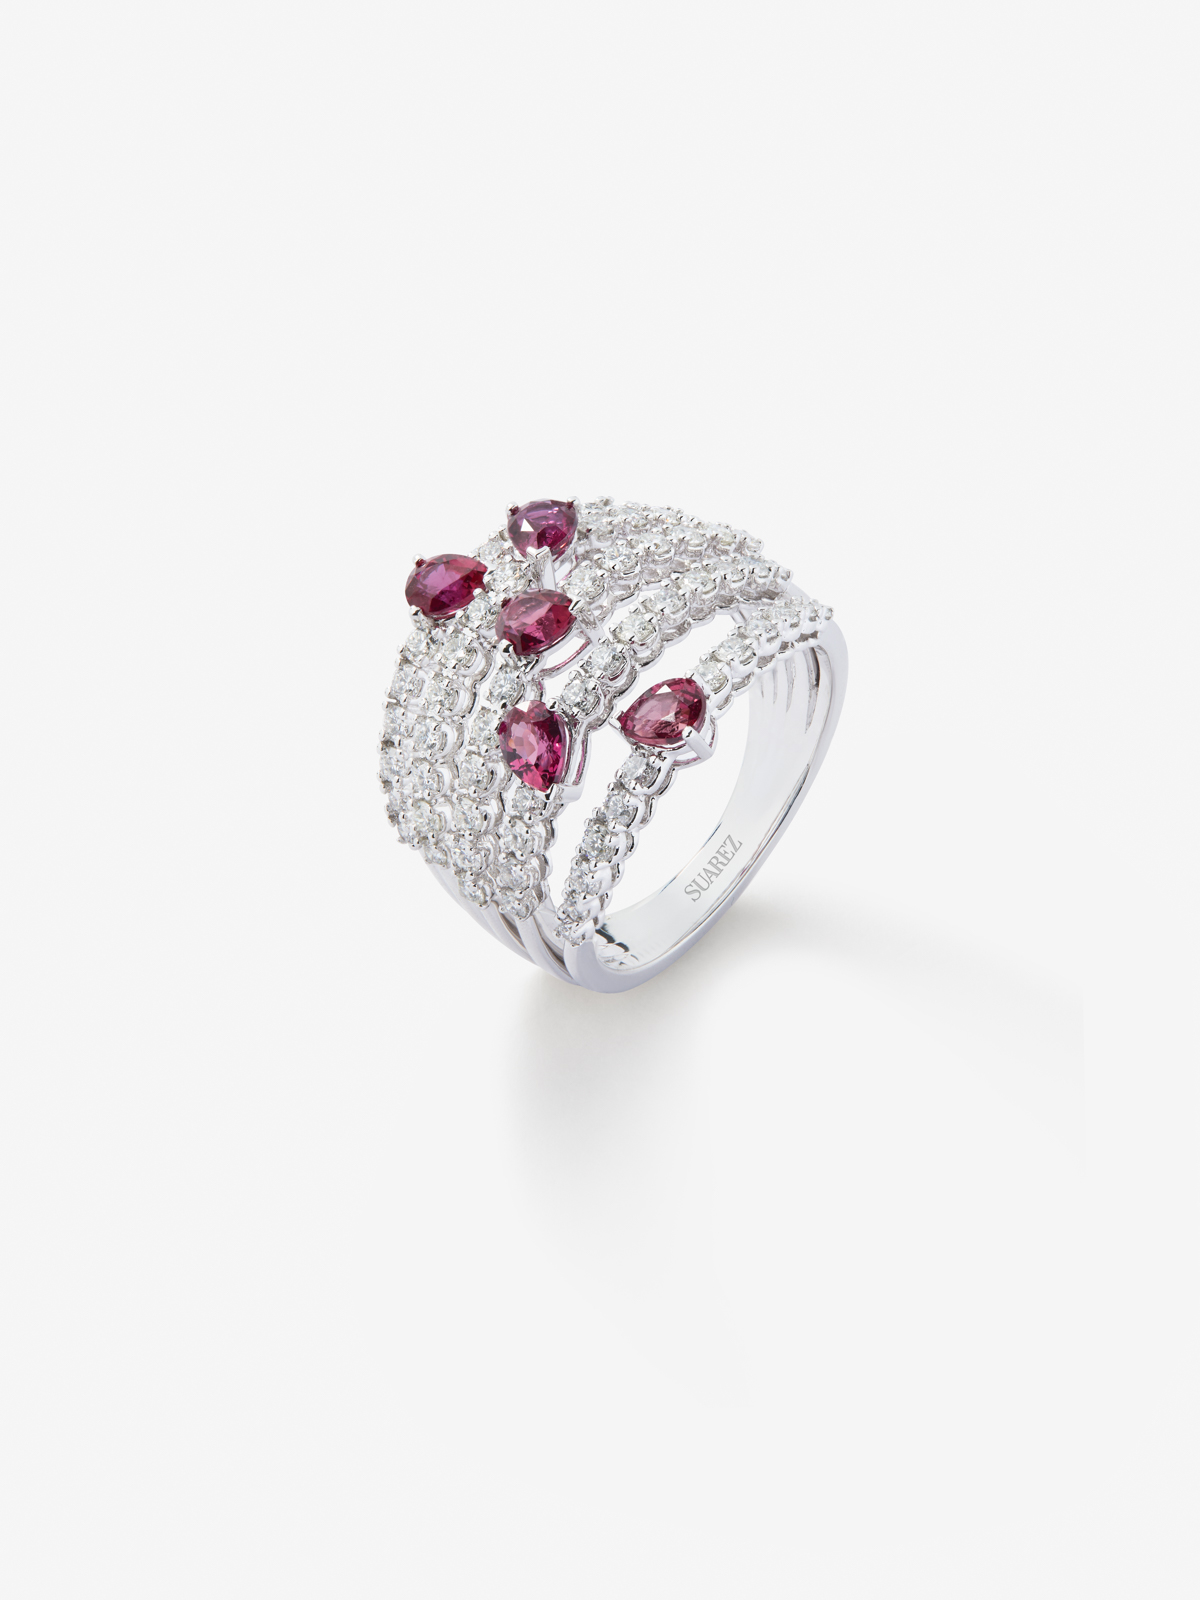 18K white gold ring with white diamonds in bright size of 1 cts and red rubies in 1.14 cts pear size